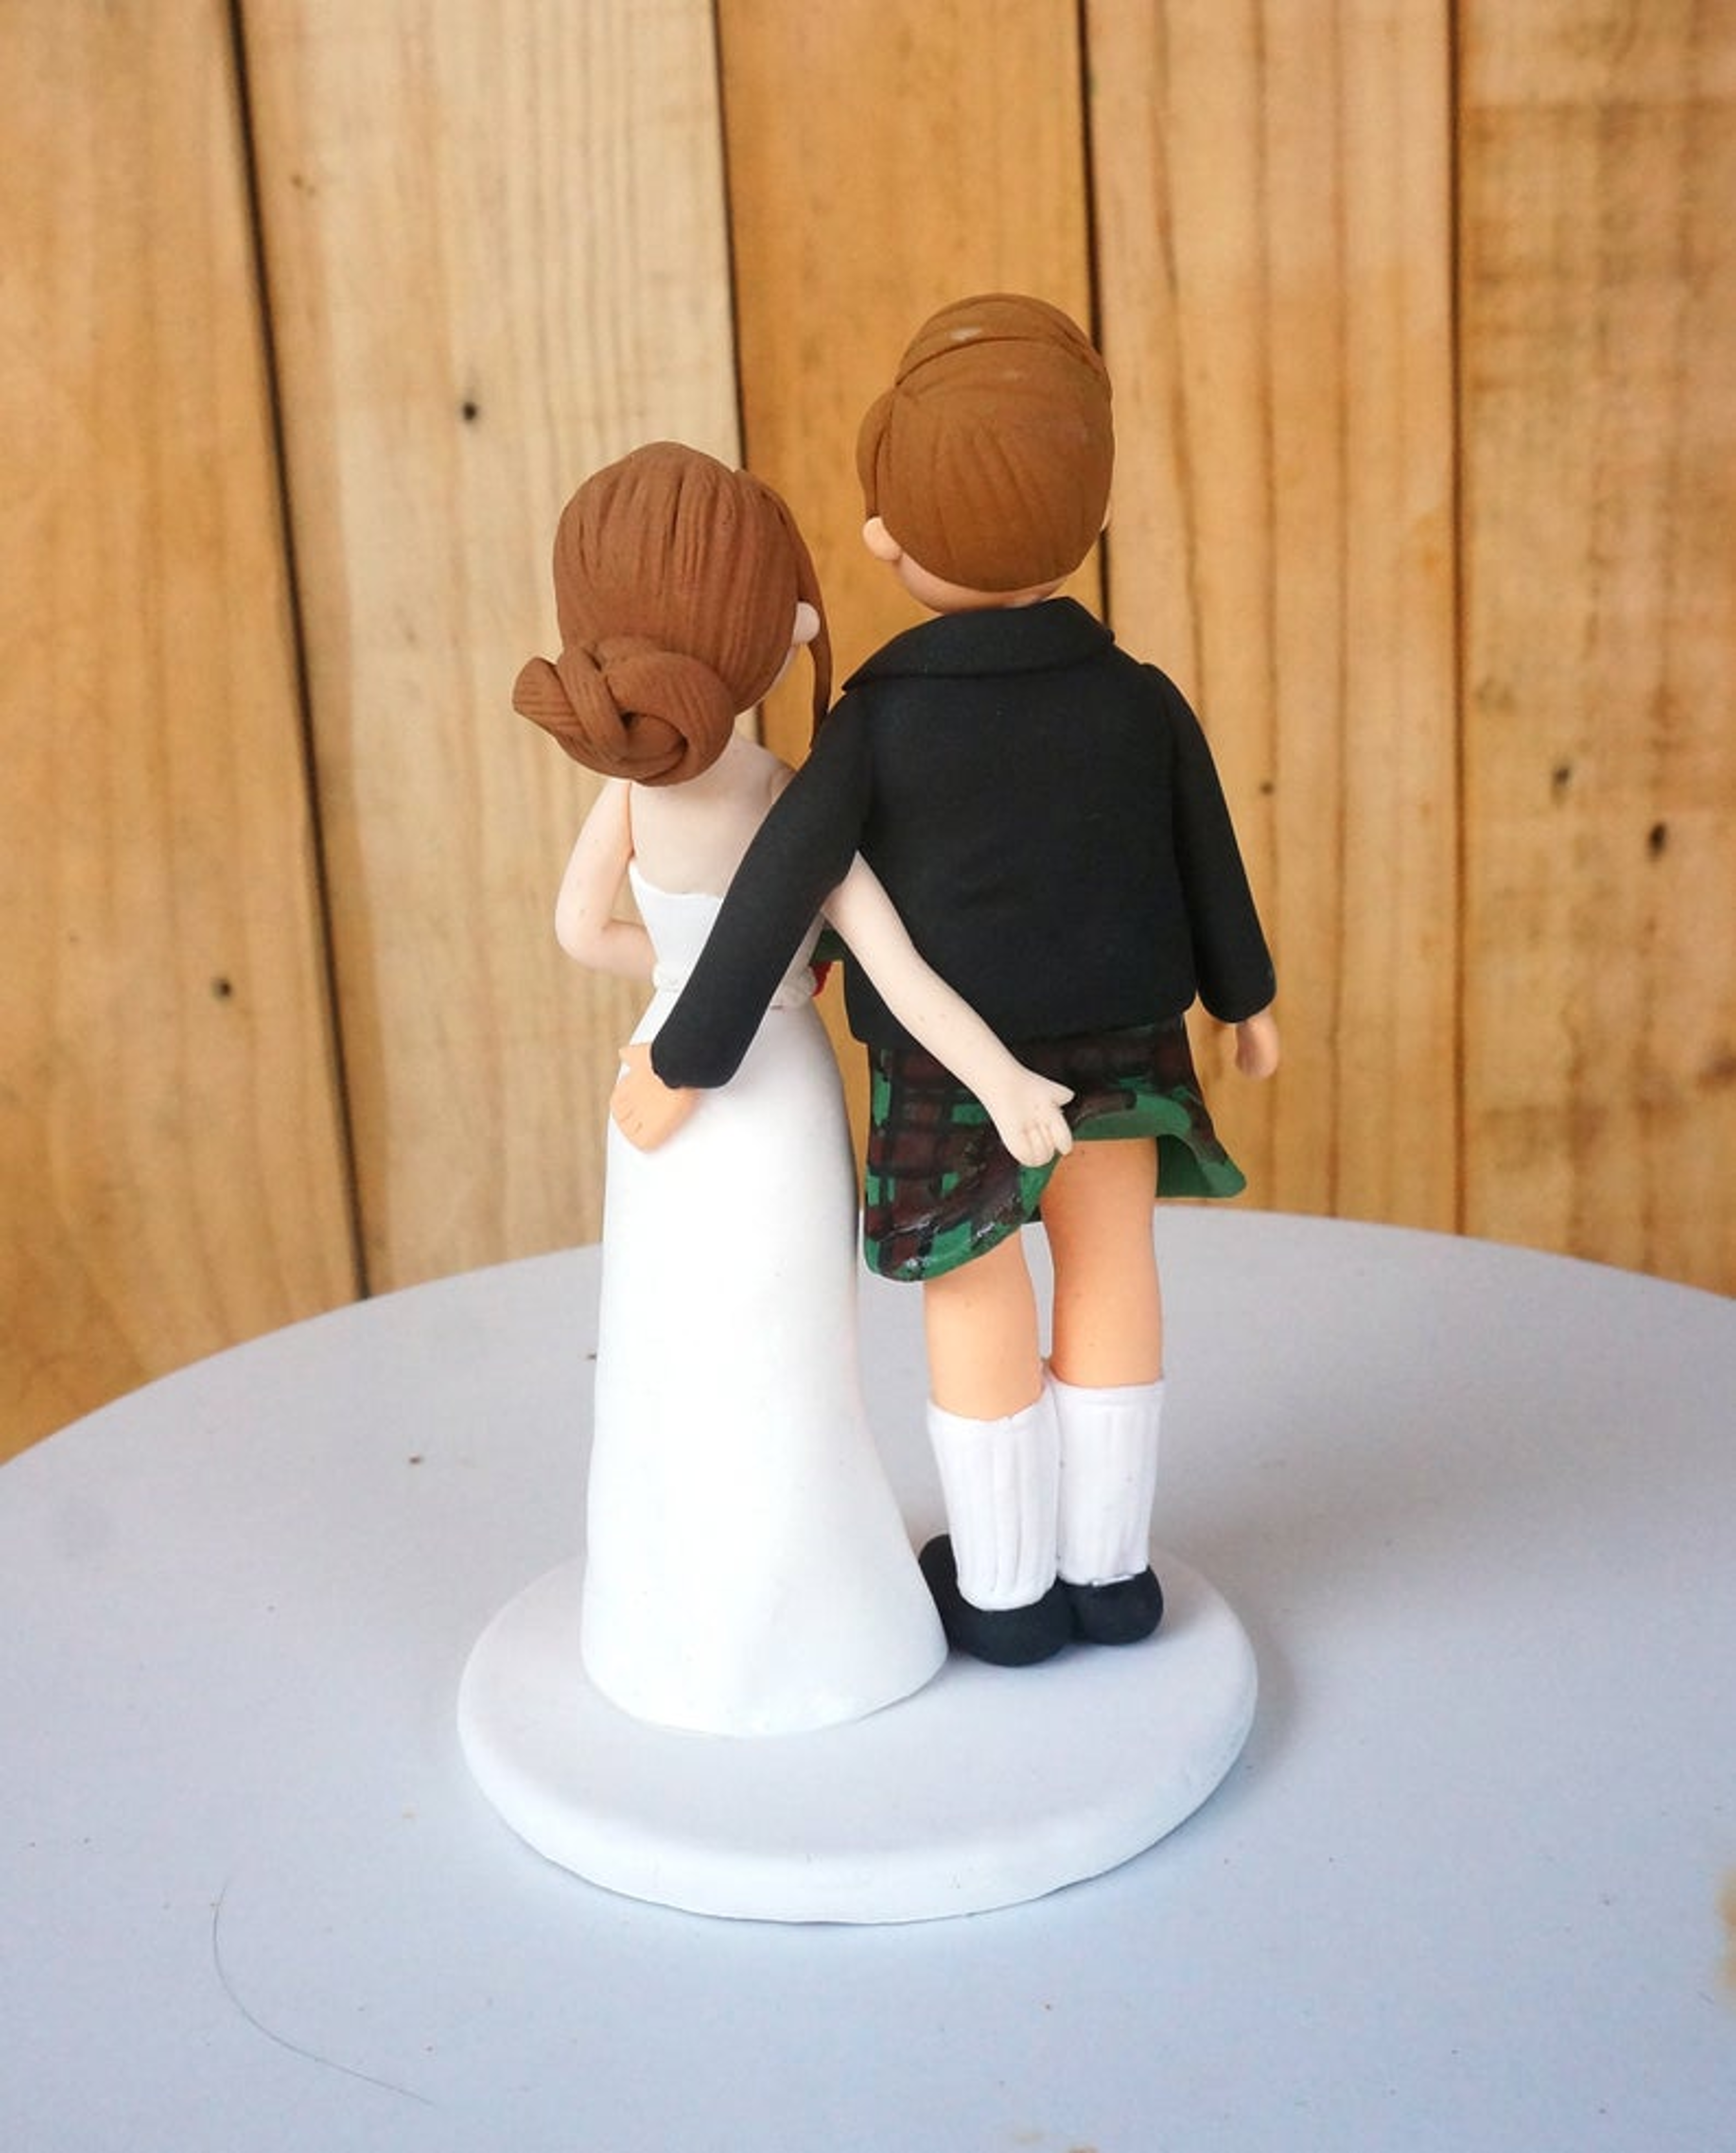 Picture of Funny wedding cake topper, Pinch love wedding cake topper - CLEARANCE